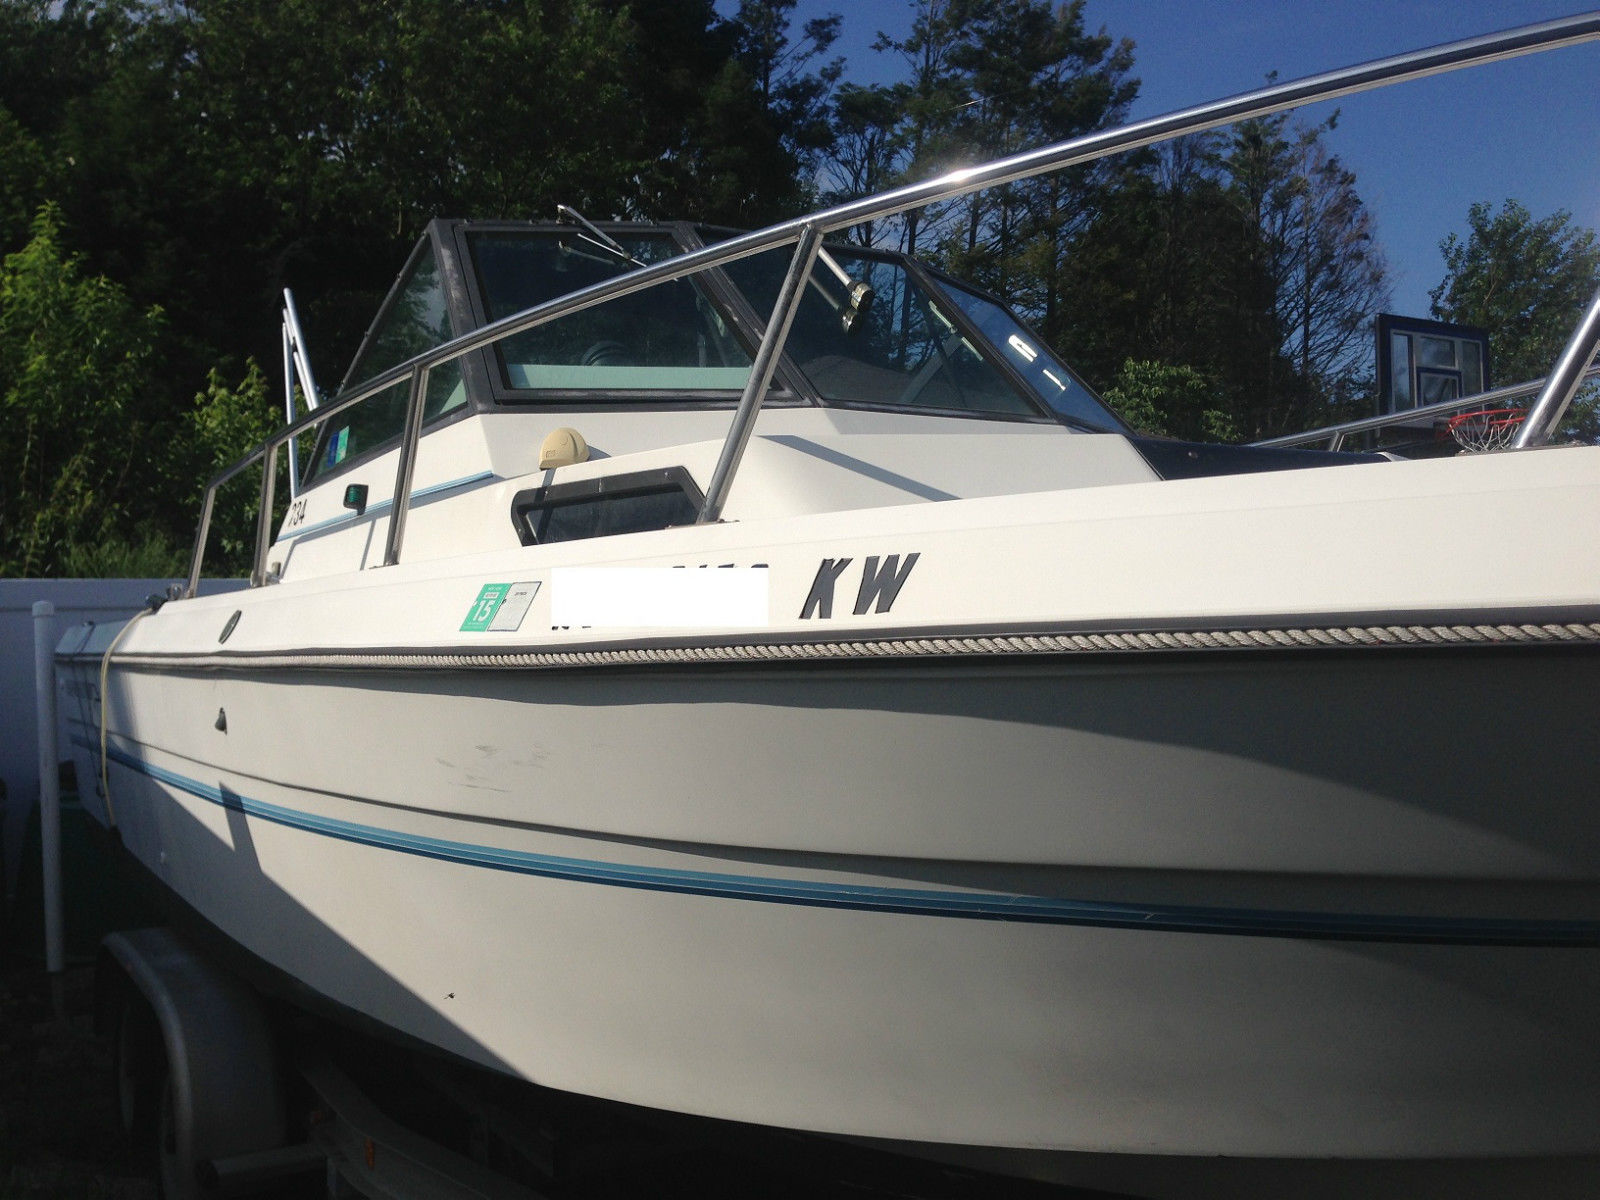 Chaparral 234 Fishing Boat 1989 for sale for $4,199 